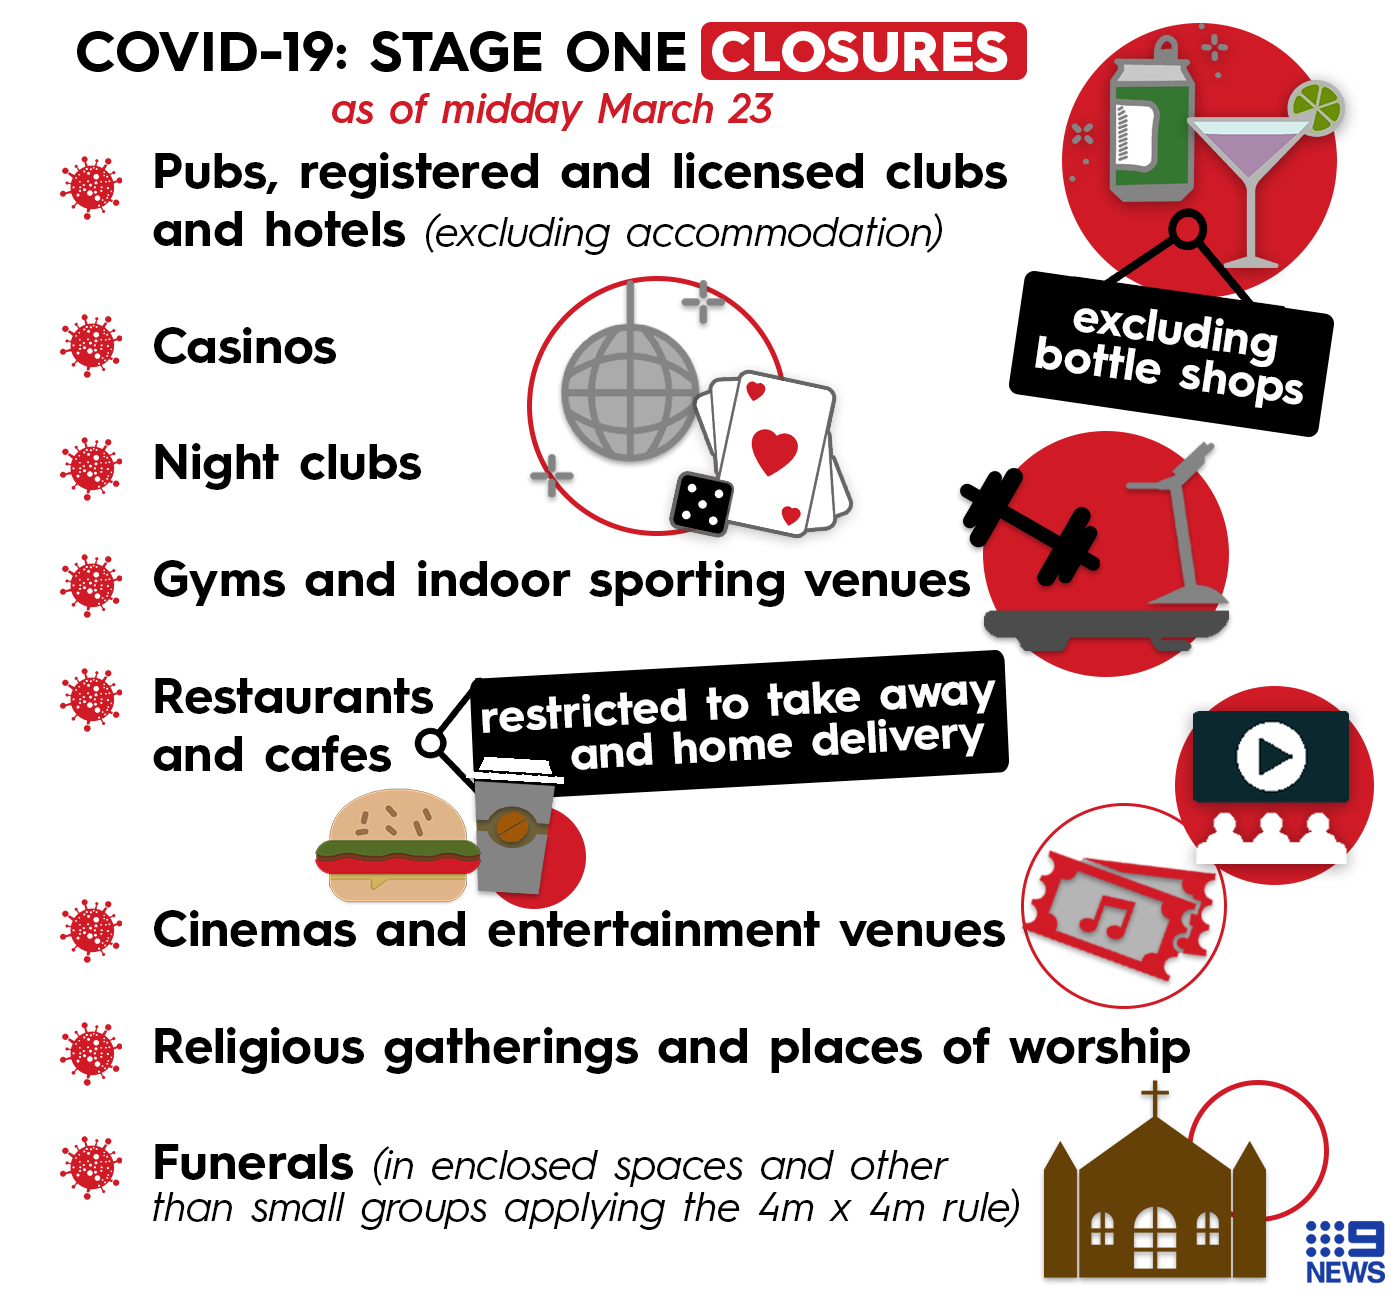 The venues affected by the shutdown measures.